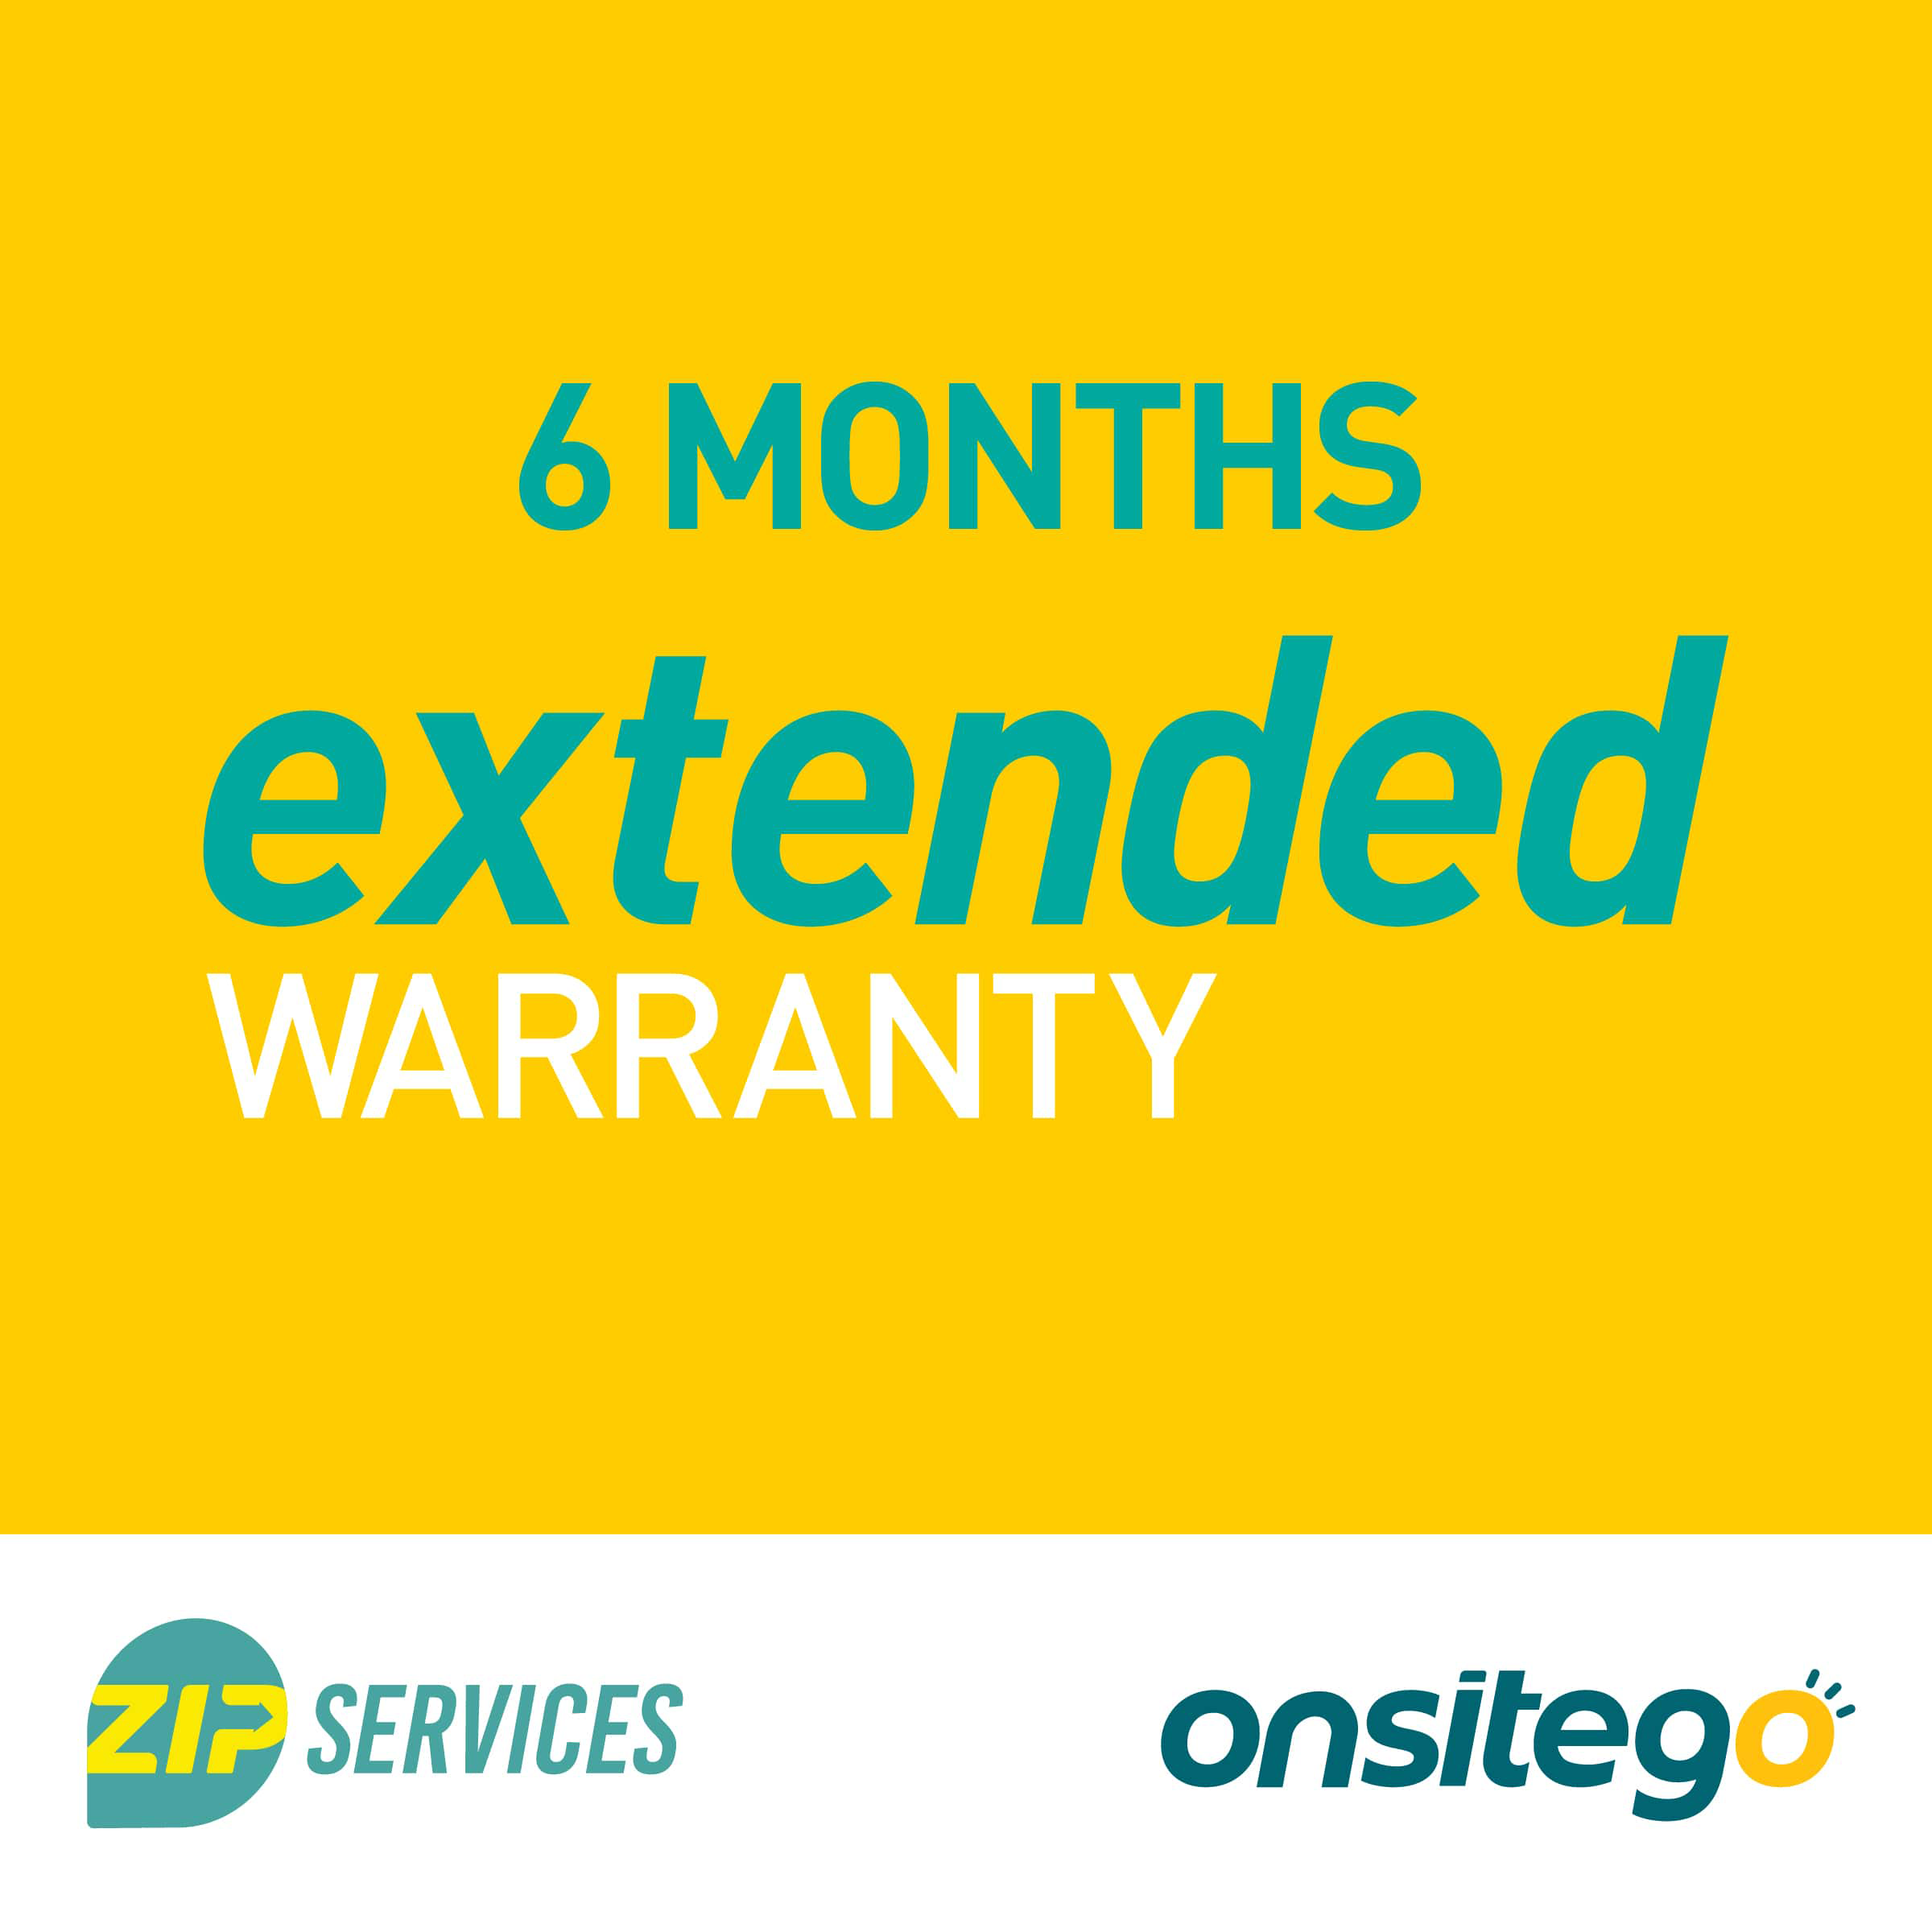 OnsiteGo 6 Months Extended Warranty for PC Accessory  Rs.4001 - Rs.5000_1